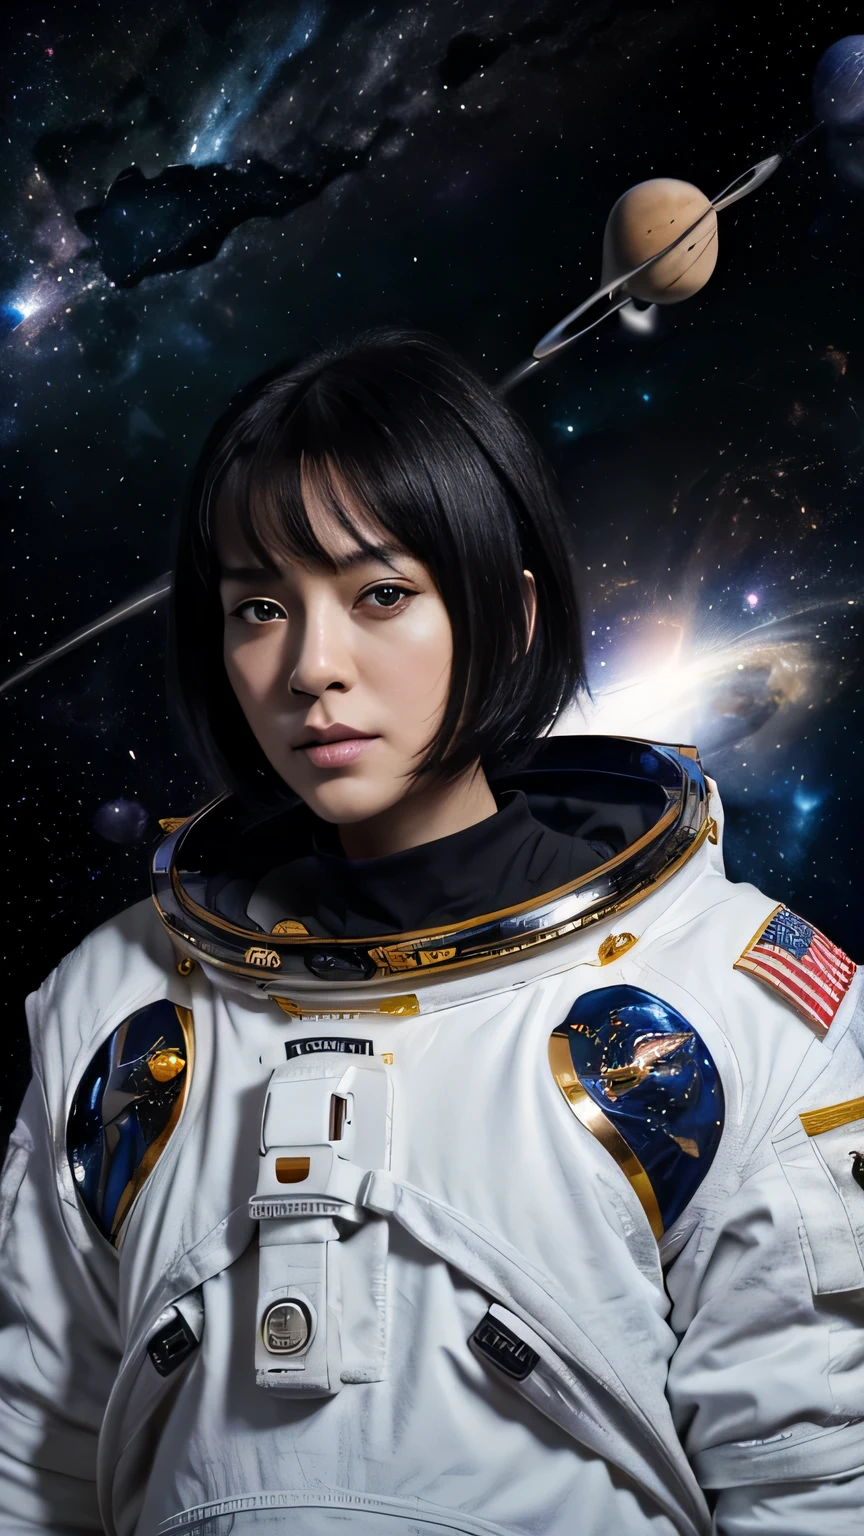 (((space background))), (highest resolution, clear_image), highest quality, masterpiece, very detailed, semi-realistic, woman with shoulder-length black hair, black eye, mature, mature woman, emperor&#39;Sister of, sexly, short hair, triple bang, Soldier in uniform, uniform, front line of fighter jets, future, sf, (((space background))),